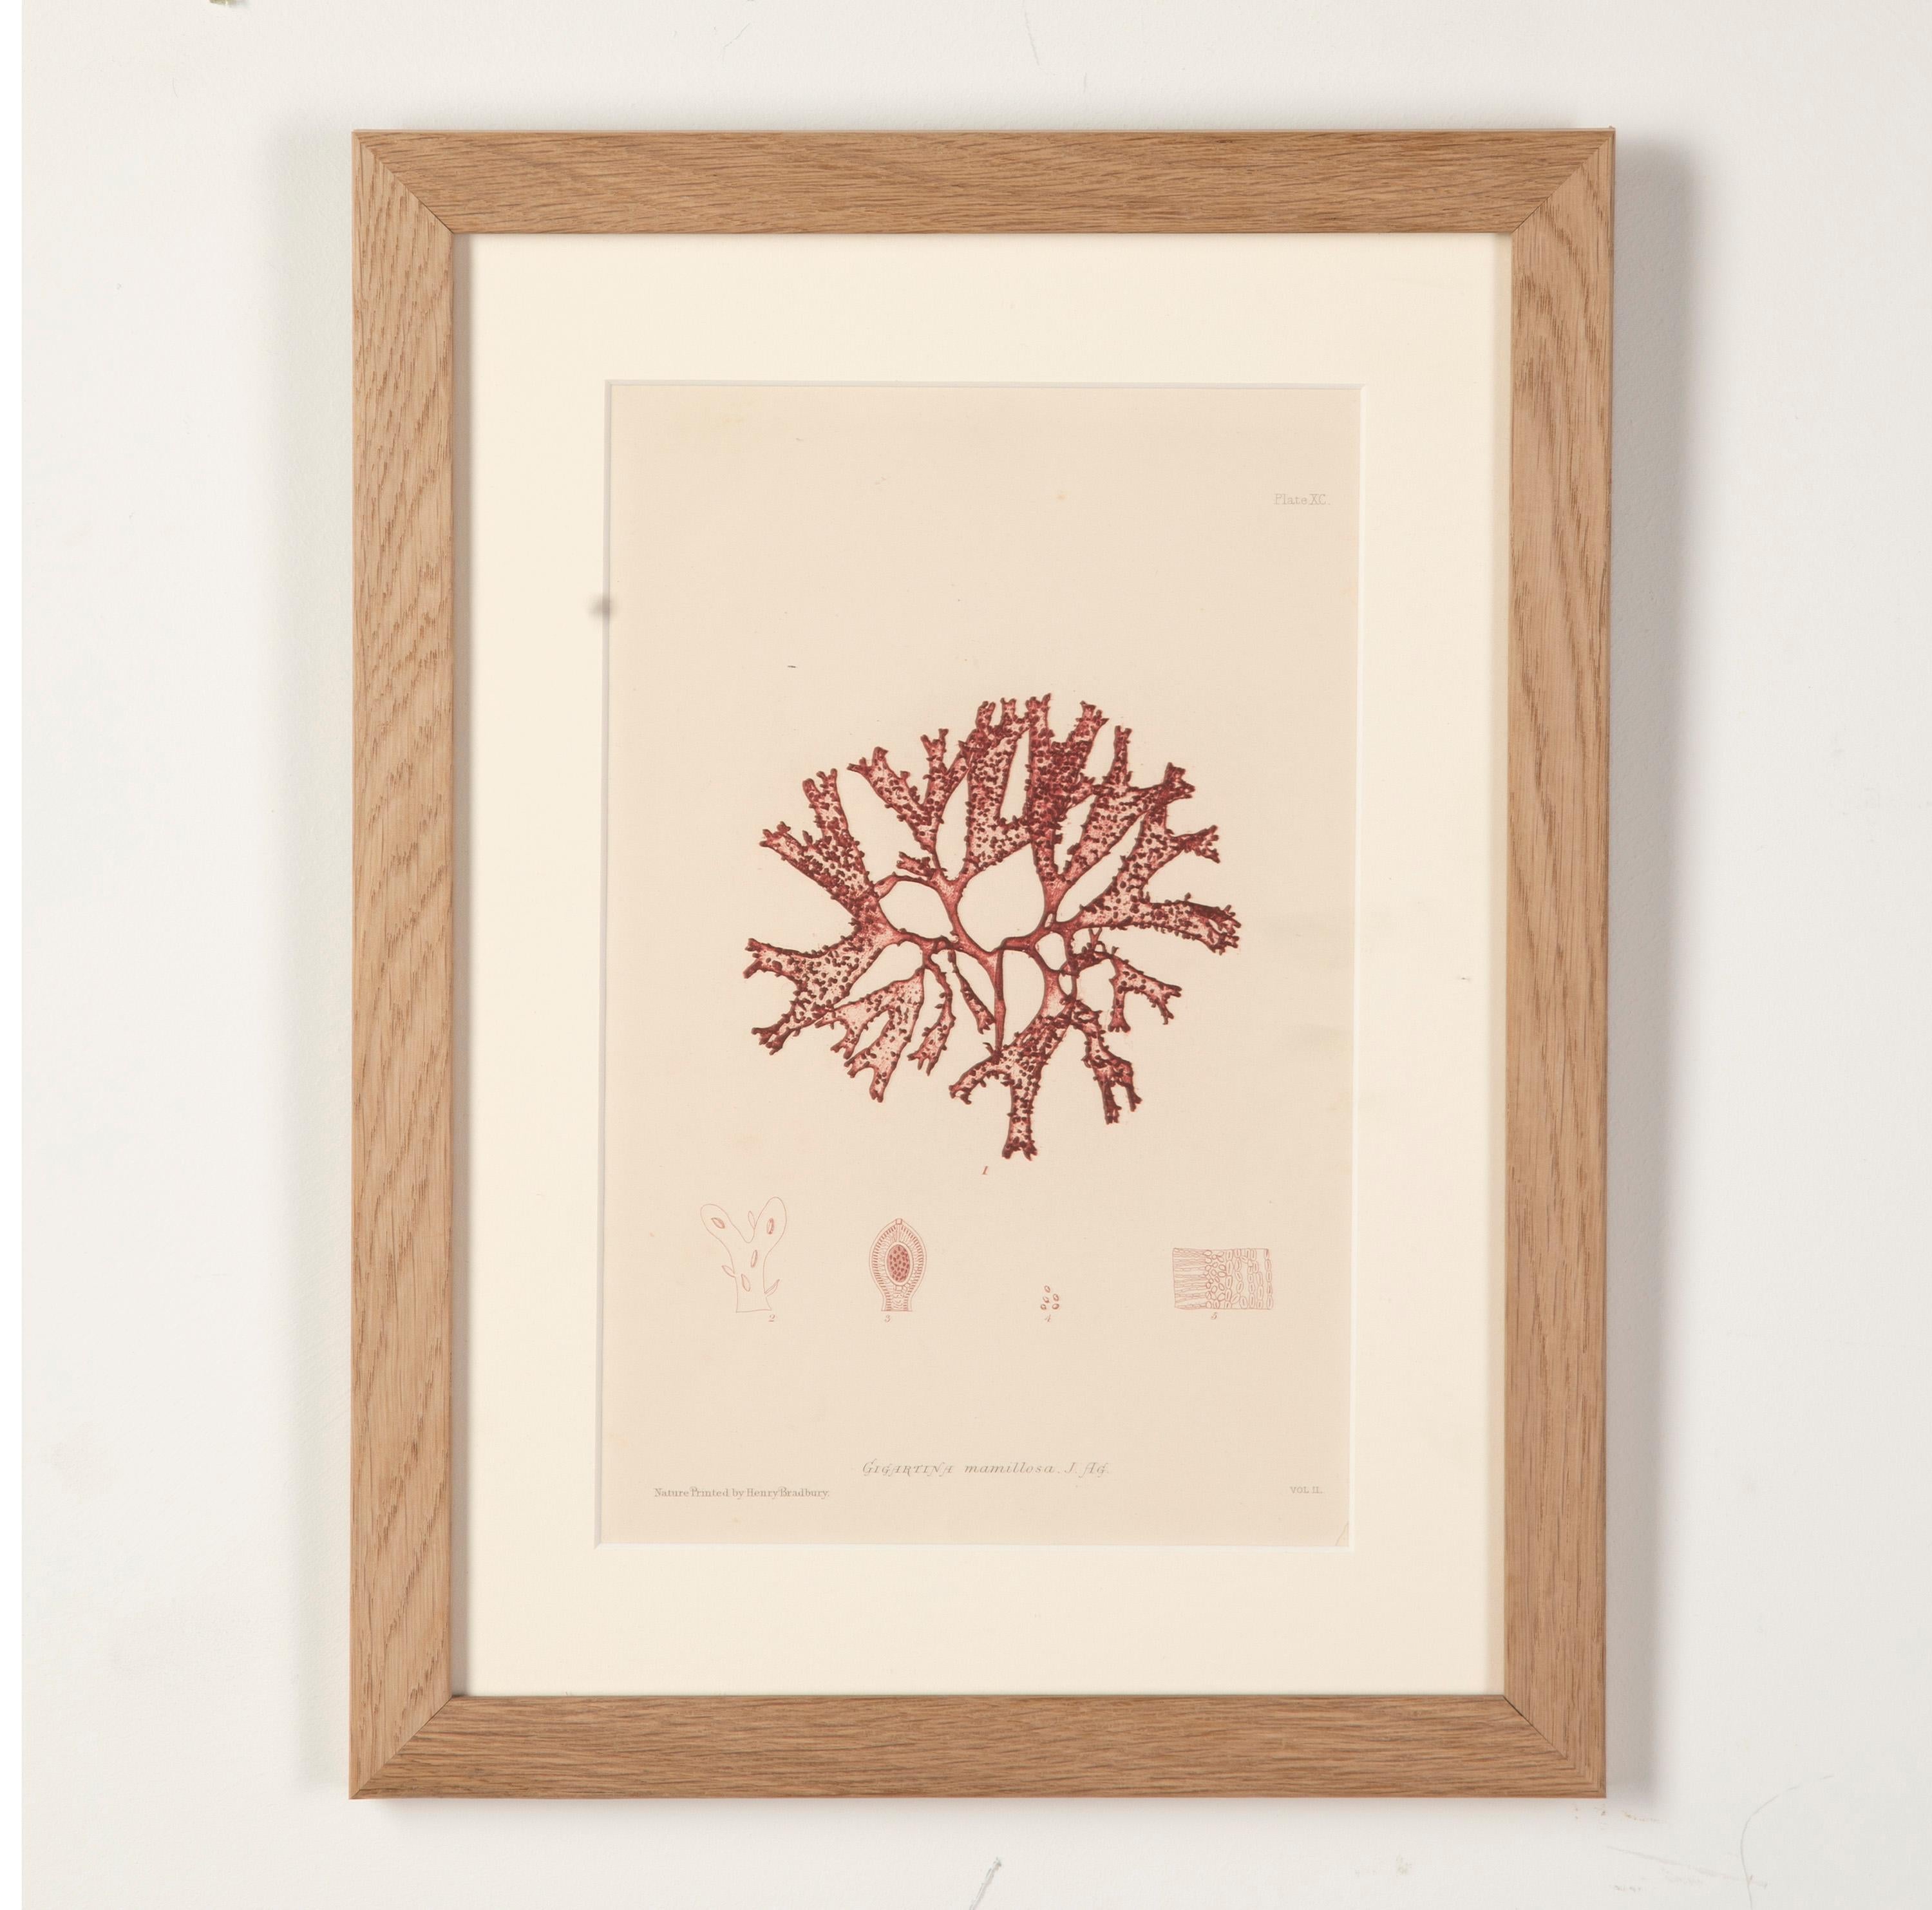 Set of six Henry Bradbury pink seaweed prints.

All six prints are mounted in light oak frames with off-white mounts and AR70 art glass.

These intricately detailed 19th century prints were created using the “nature-printed” process developed by